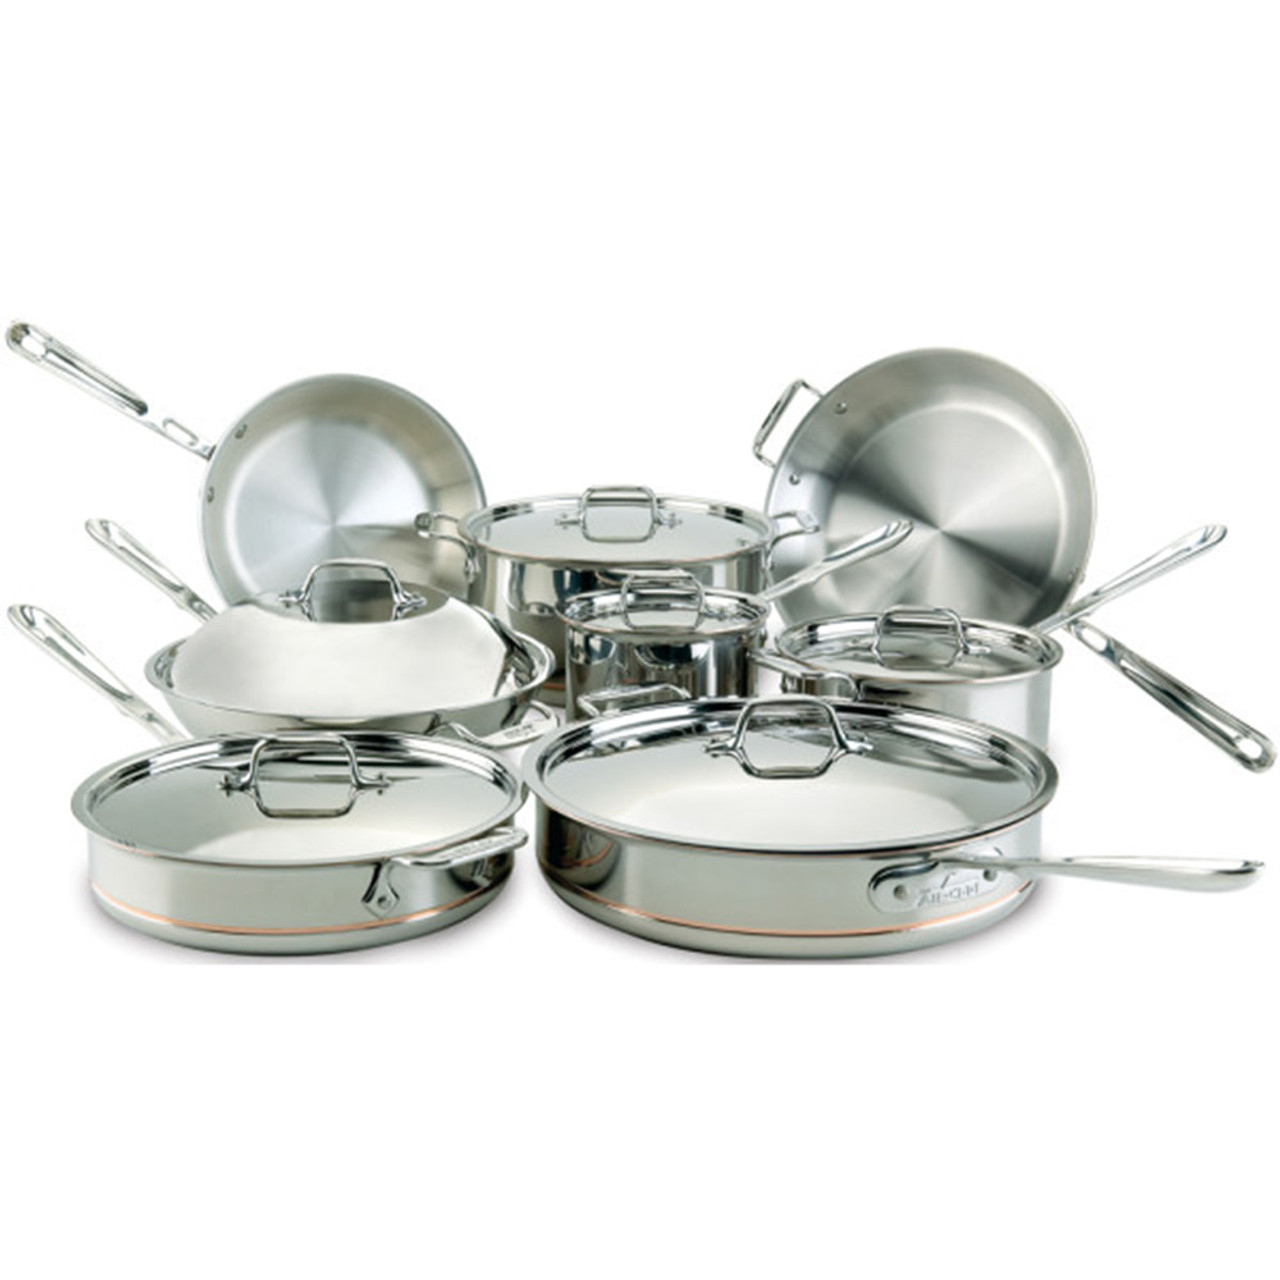 https://cdn11.bigcommerce.com/s-hccytny0od/images/stencil/1280x1280/products/507/1913/all-clad-copper-core-14-piece-cookware-set__18213.1511047771.jpg?c=2?imbypass=on